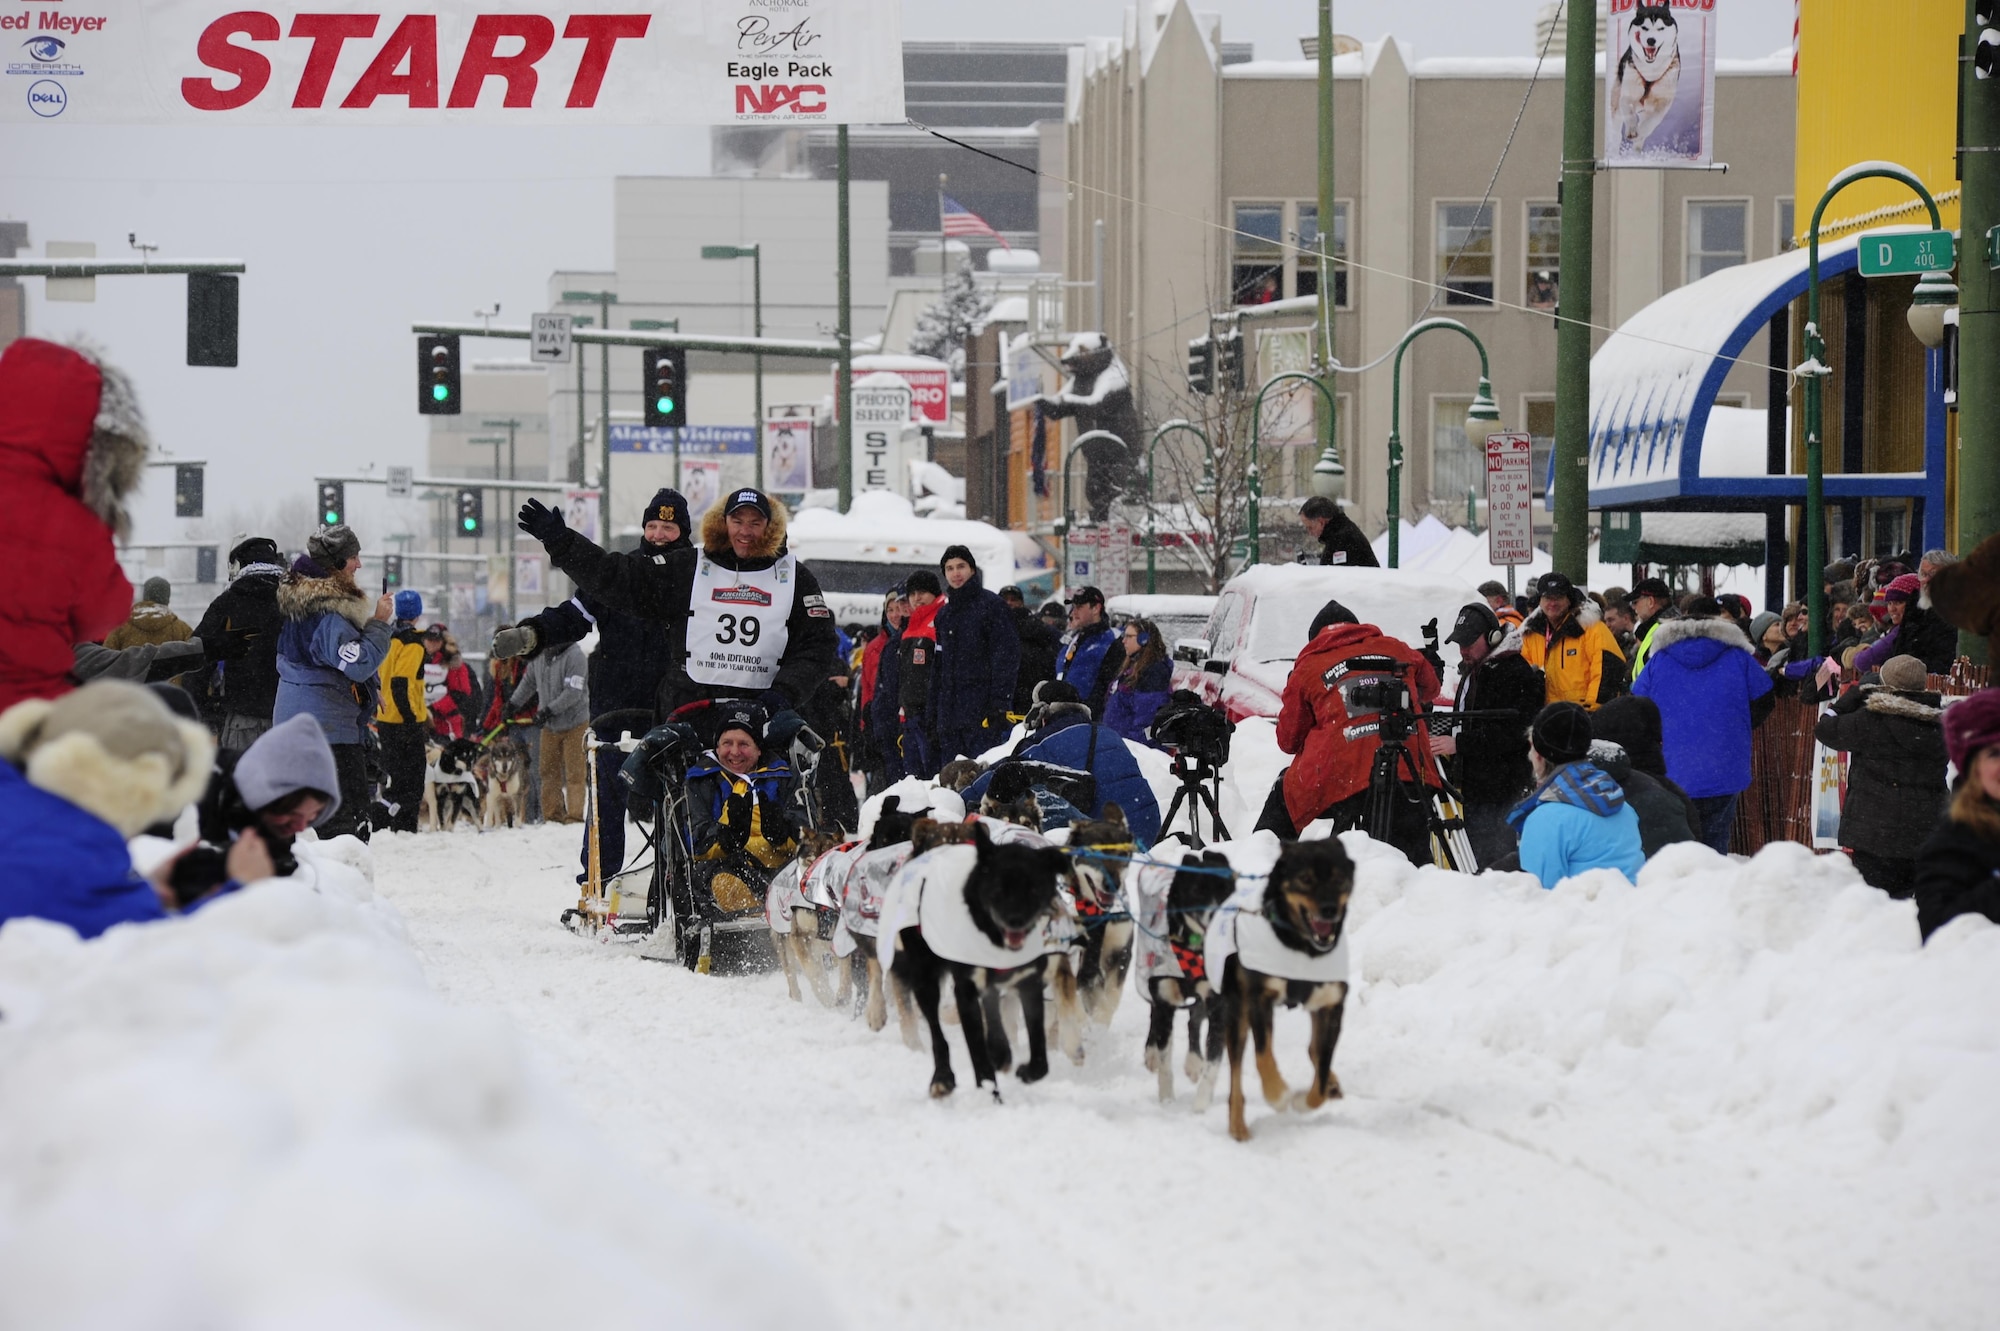 ANCHORAGE, Alaska – Coast Guard sponsored Iditarod musher Ken Anderson departs on the first leg of the 40th running of the Iditarod, March 3, 2012.
The Coast Guard is sponsoring Anderson in the 40th Iditarod as part of an outreach effort to the villages in remote northern Alaska and in tribute to the Coast Guard’s historical partnership with the people of Alaska.
U.S. Coast Guard photo by Petty Officer 1st Class David Mosley